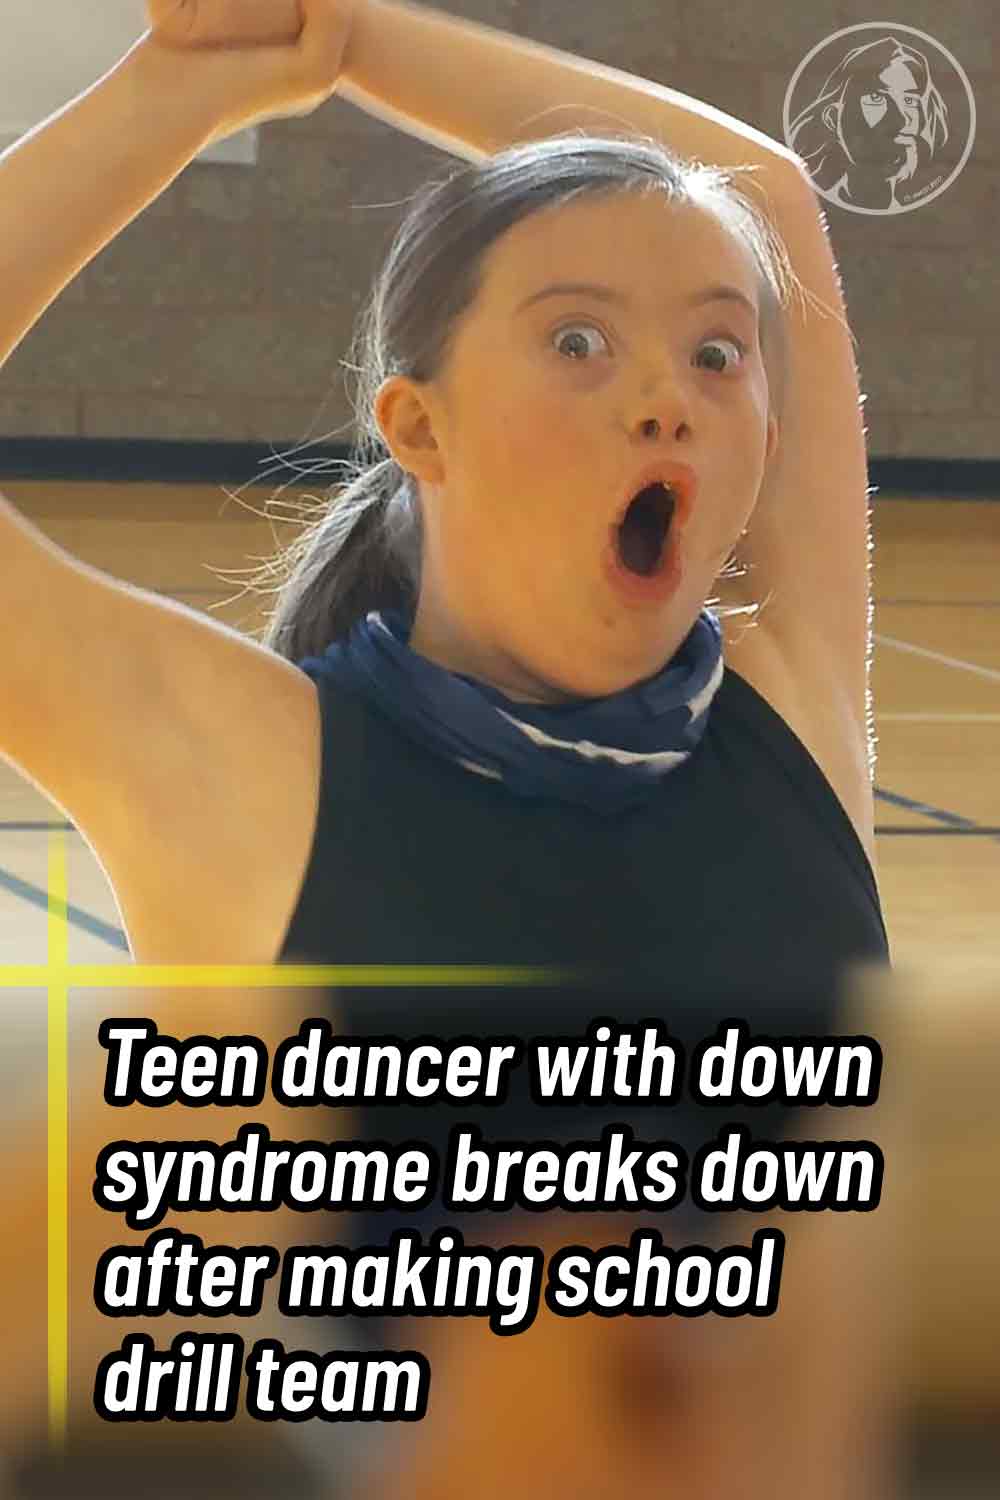 Teen dancer with down syndrome breaks down after making school drill team